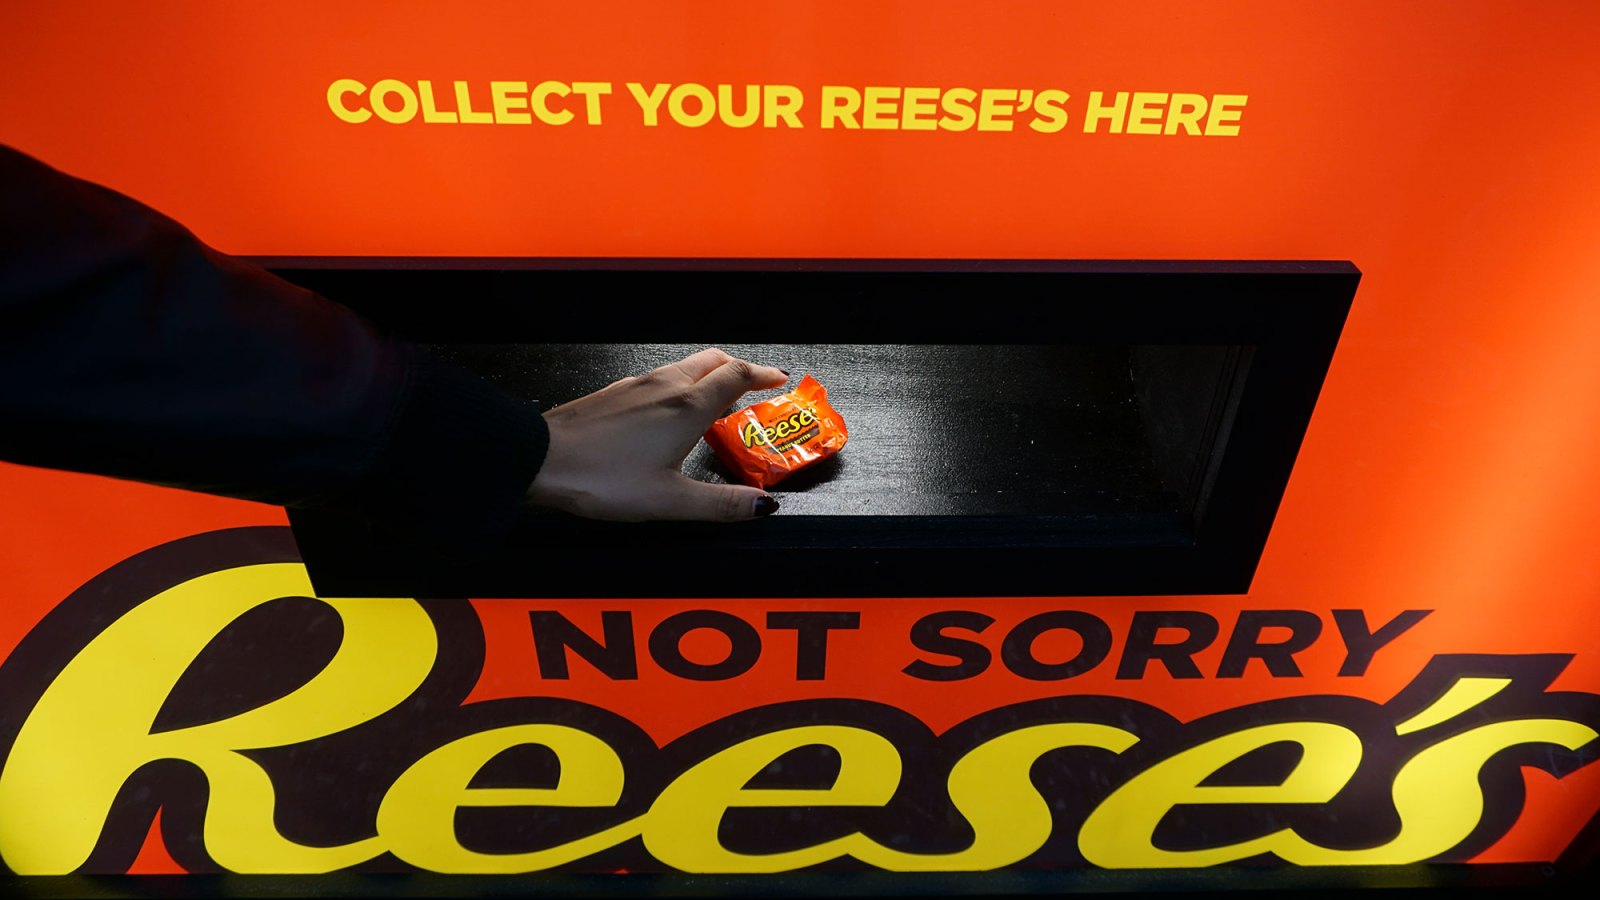 Reese's Not Sorry Campaign - WNW